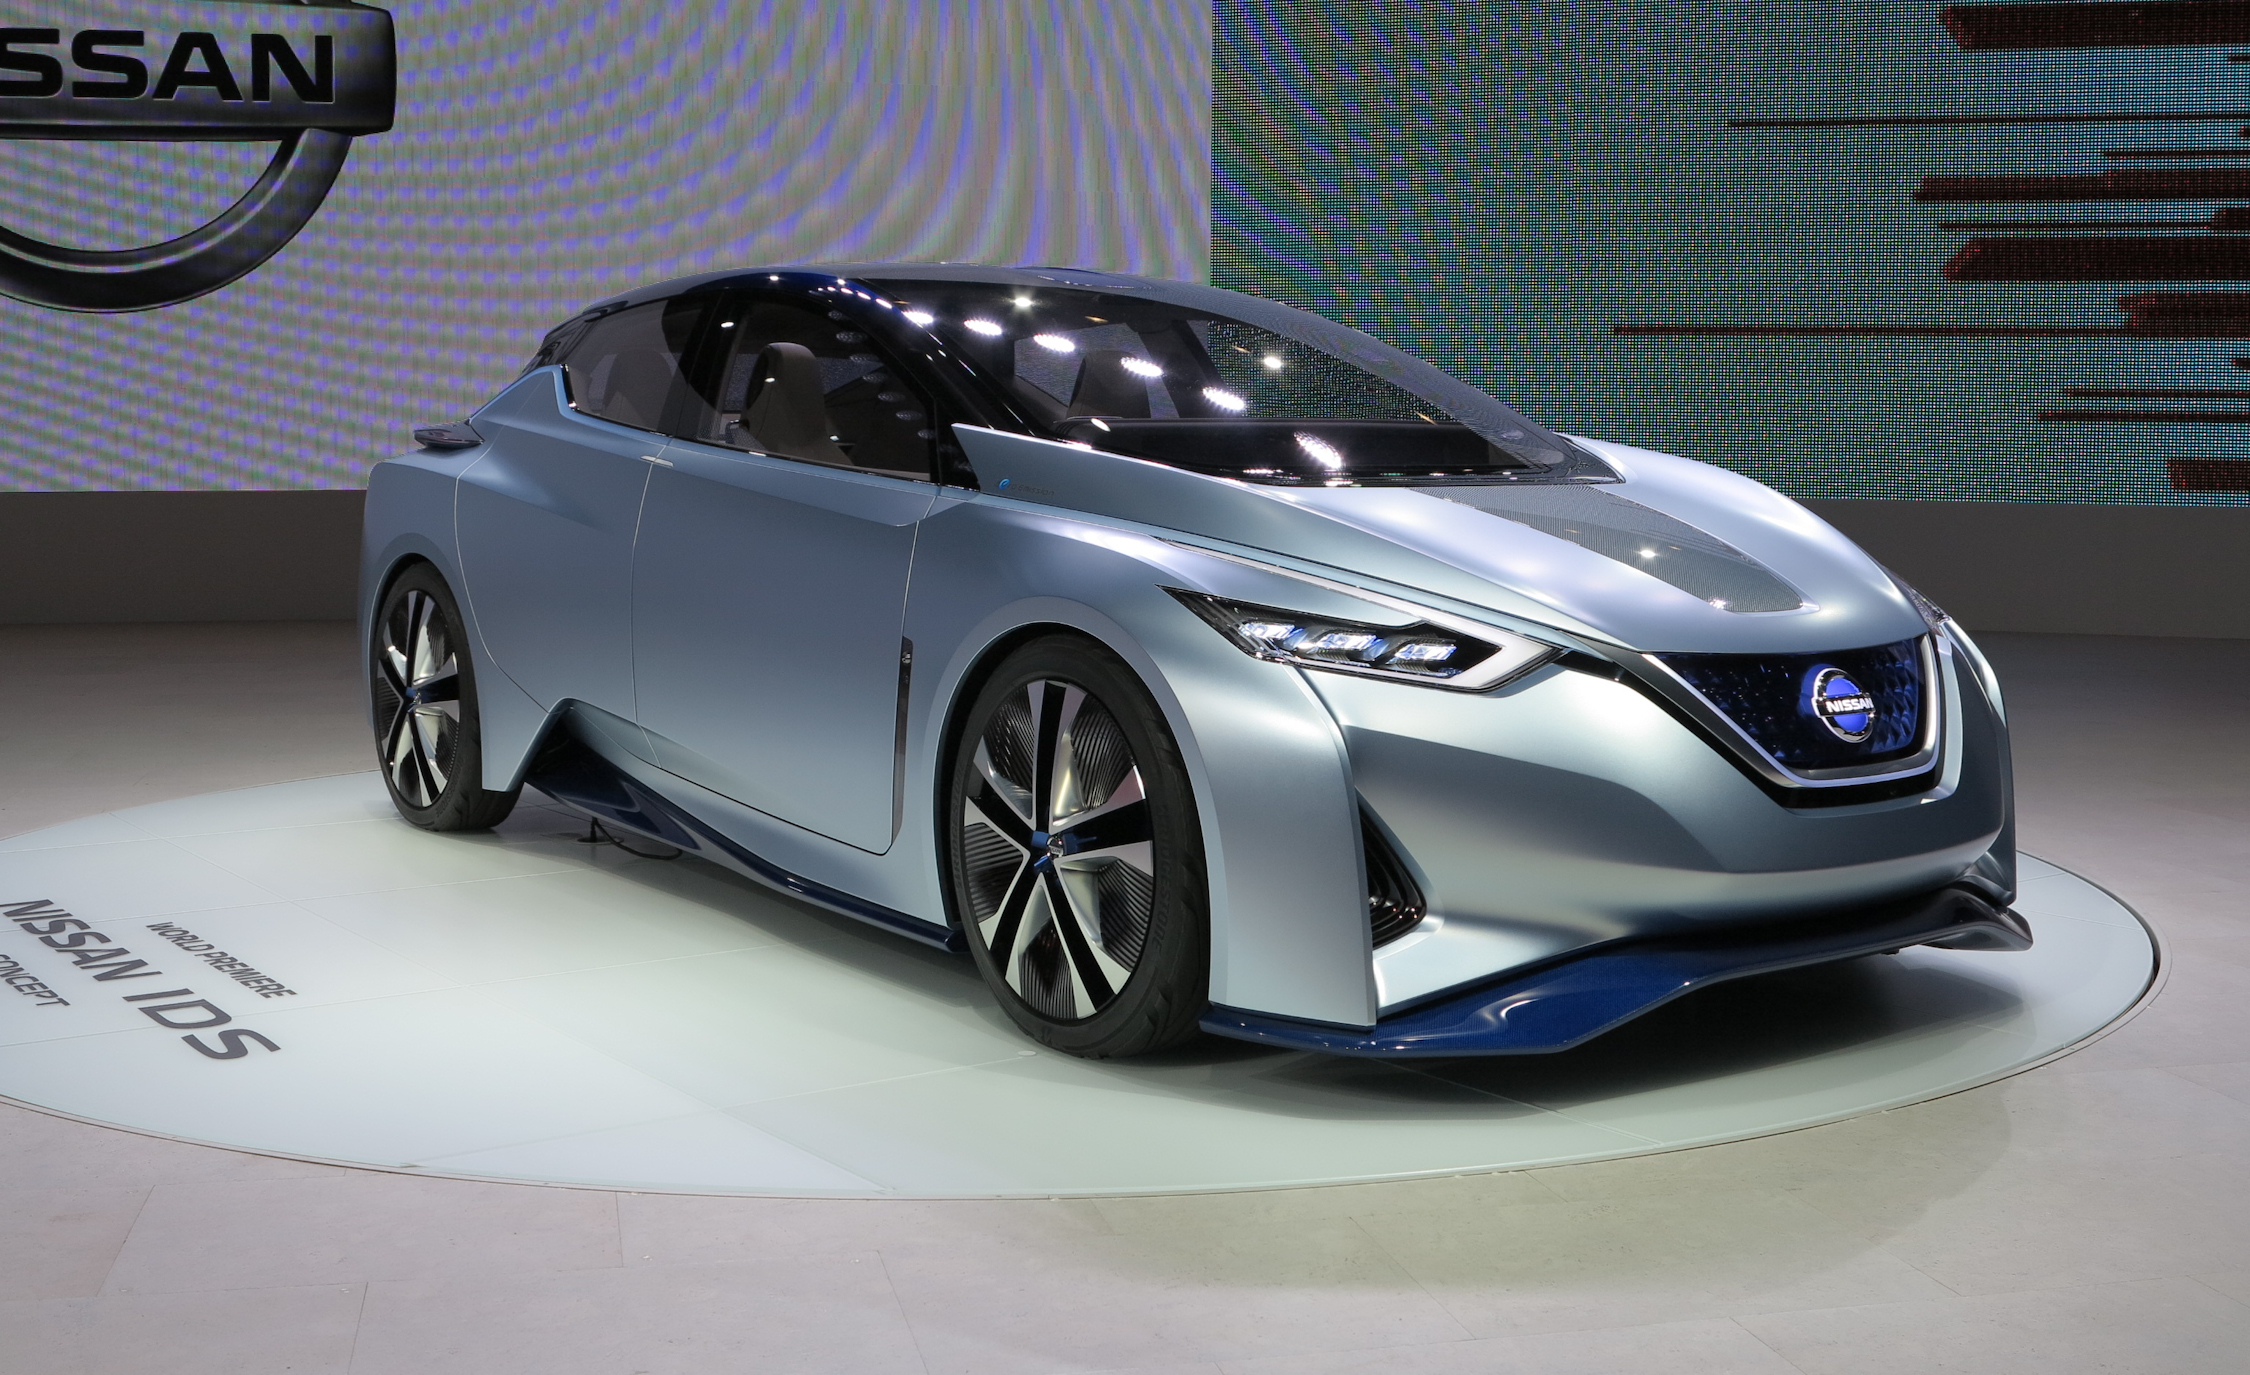 2250x1375 > Nissan Leaf Wallpapers